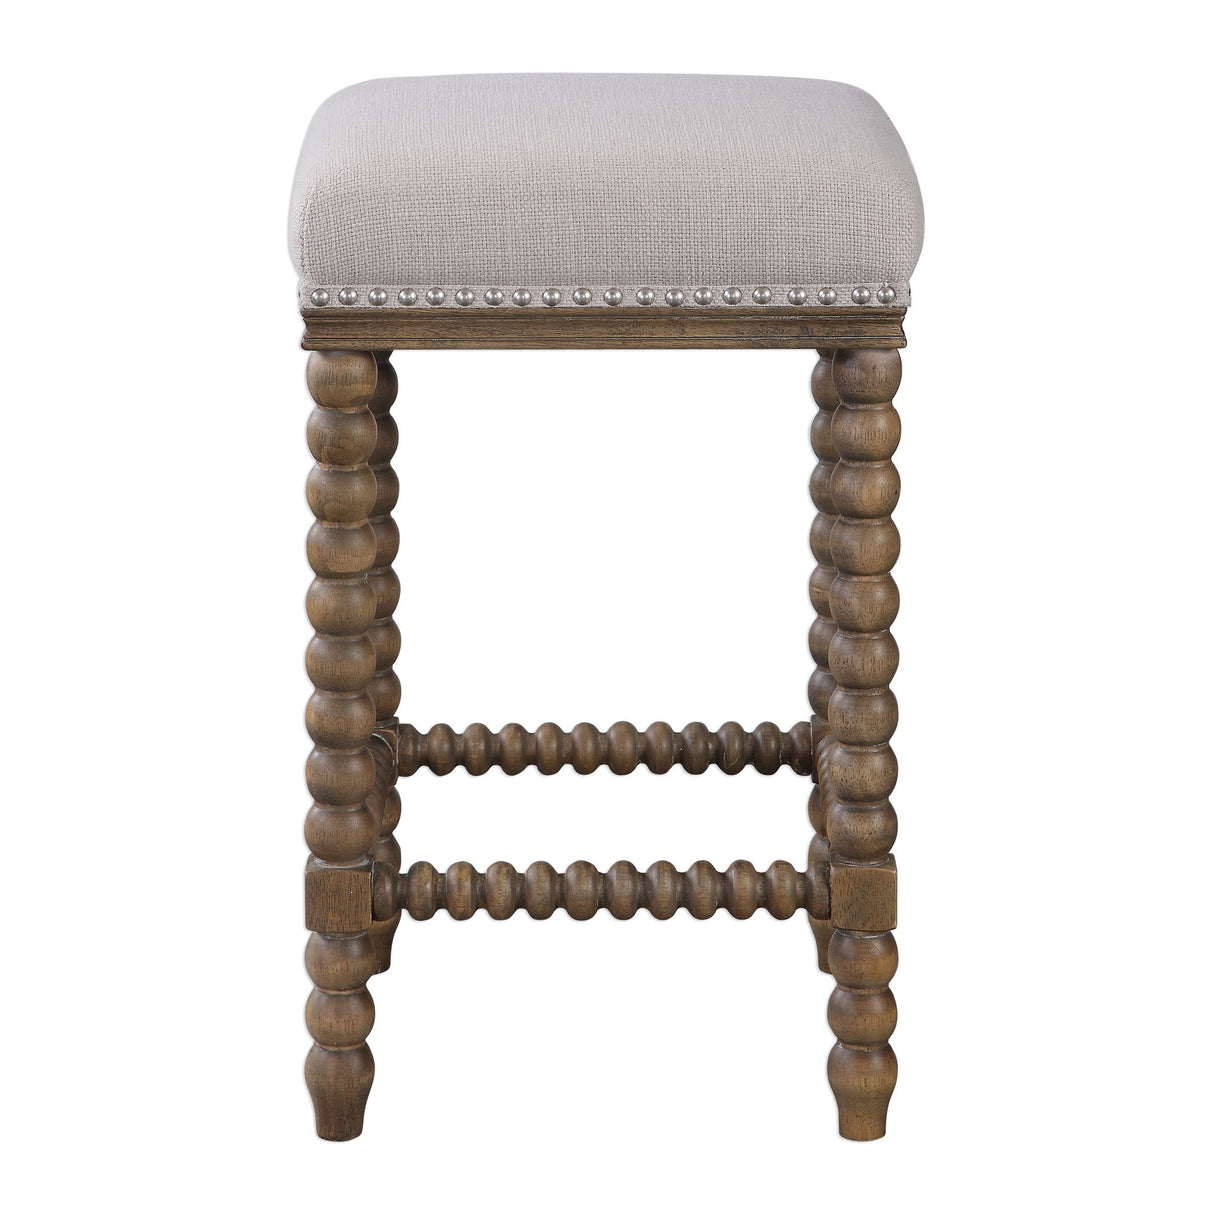 Pryce - Wooden Counter Stool - White & Light Brown